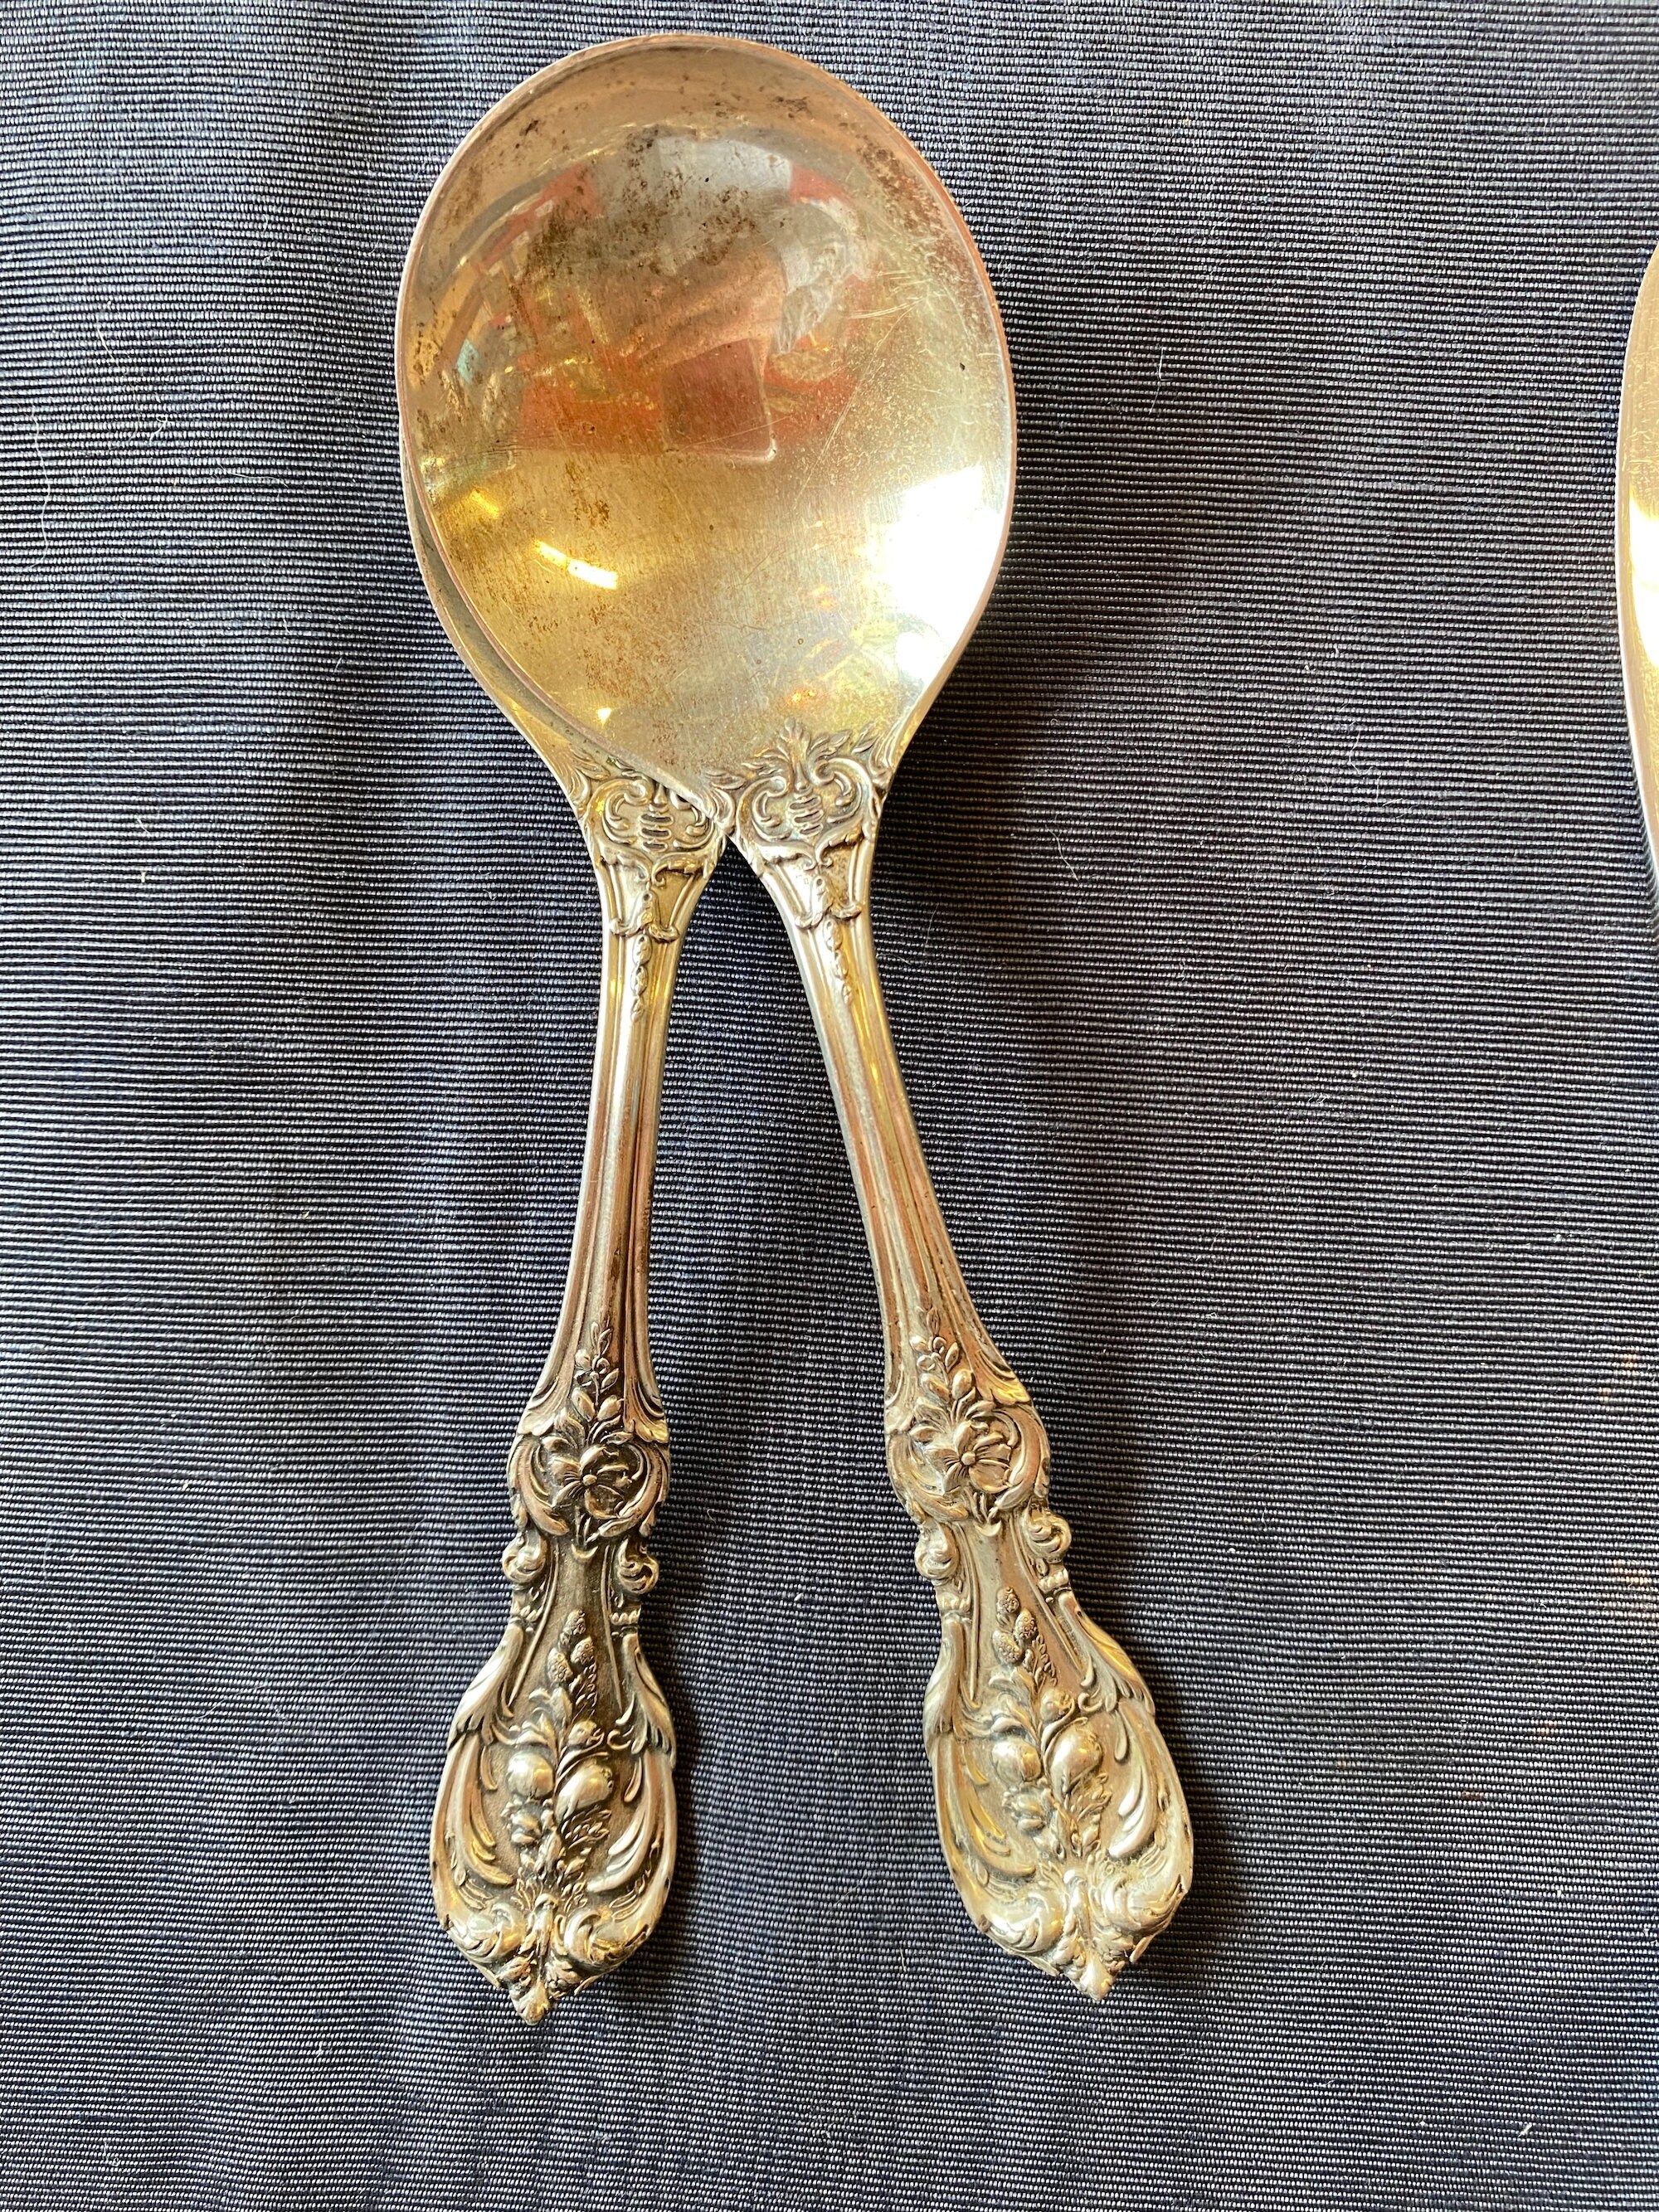 Francis I flatware by Reed & Barton individual Cream Soup Spoons Sterling 